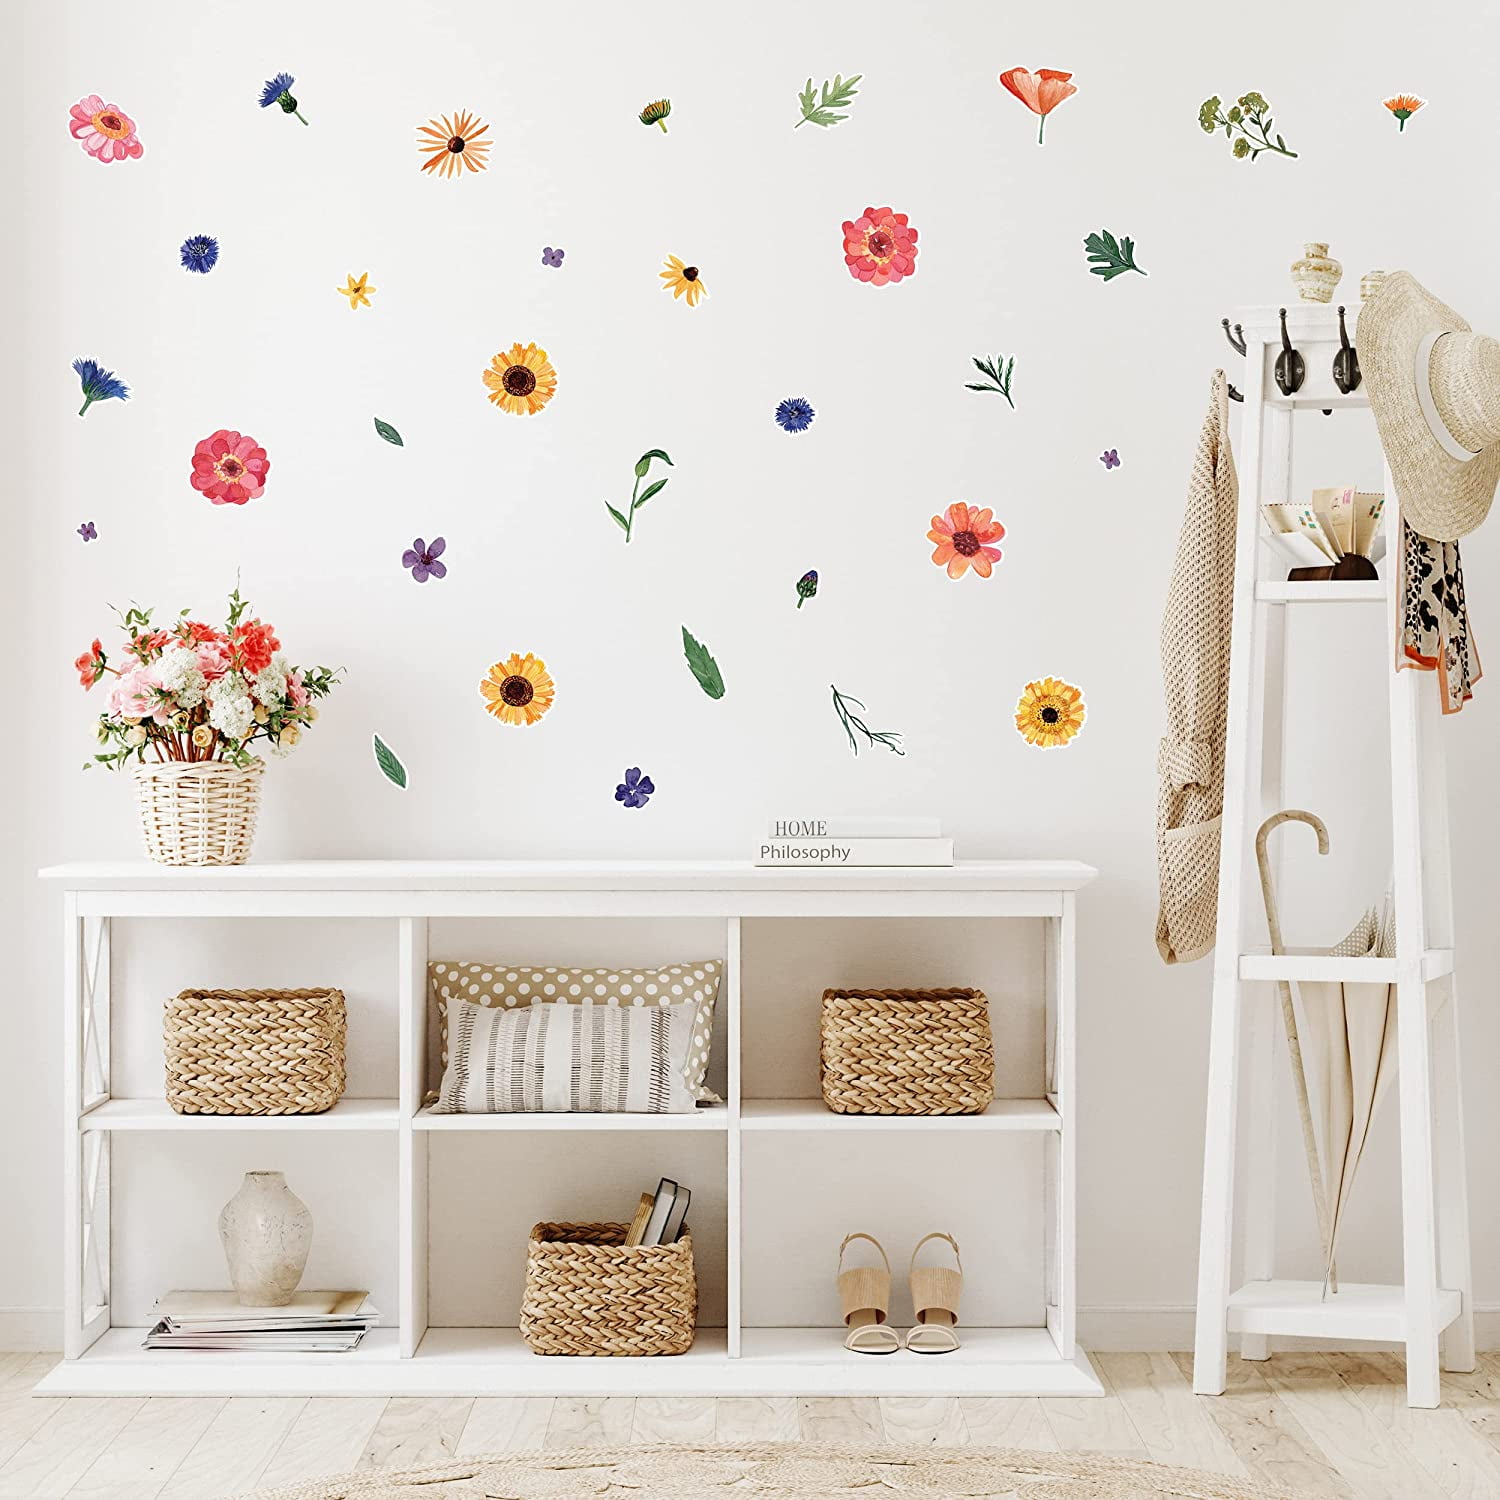 8 Sheet 160 Pcs Daisy Wall Decal Flower Wall Decal Daisy Decor White Daisy  Decals Floral Decals Peel and Stick Aesthetic for Wall Bedroom Living Room